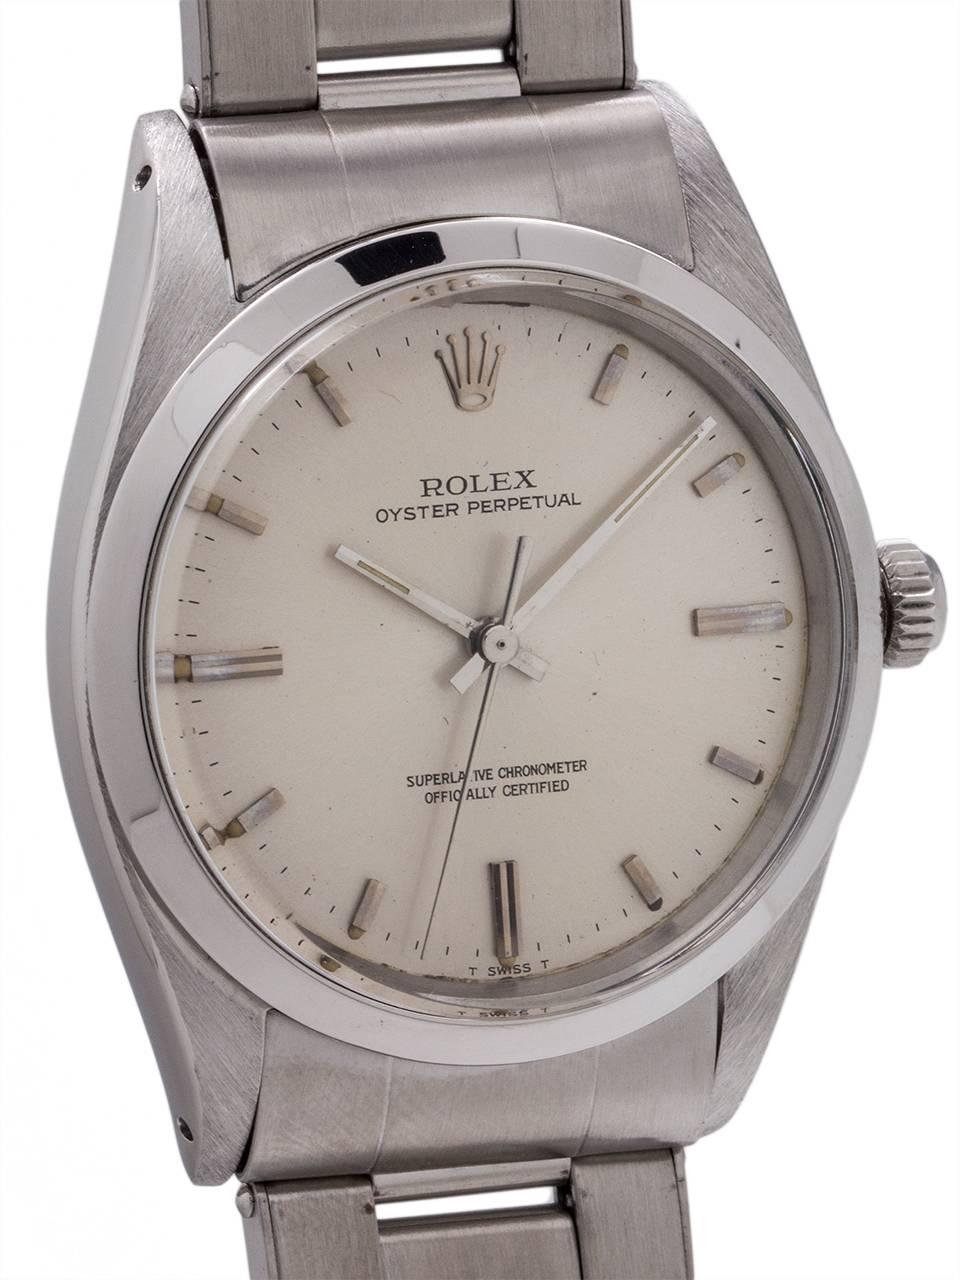 
Rolex Oyster Perpetual ref# 1018, serial #1.7 million, circa 1968. Featuring a 36mm diameter case with smooth bezel and acrylic crystal. Signed Rolex Oyster screw down crown and case back. Featuring very pleasing original silvered satin dial with